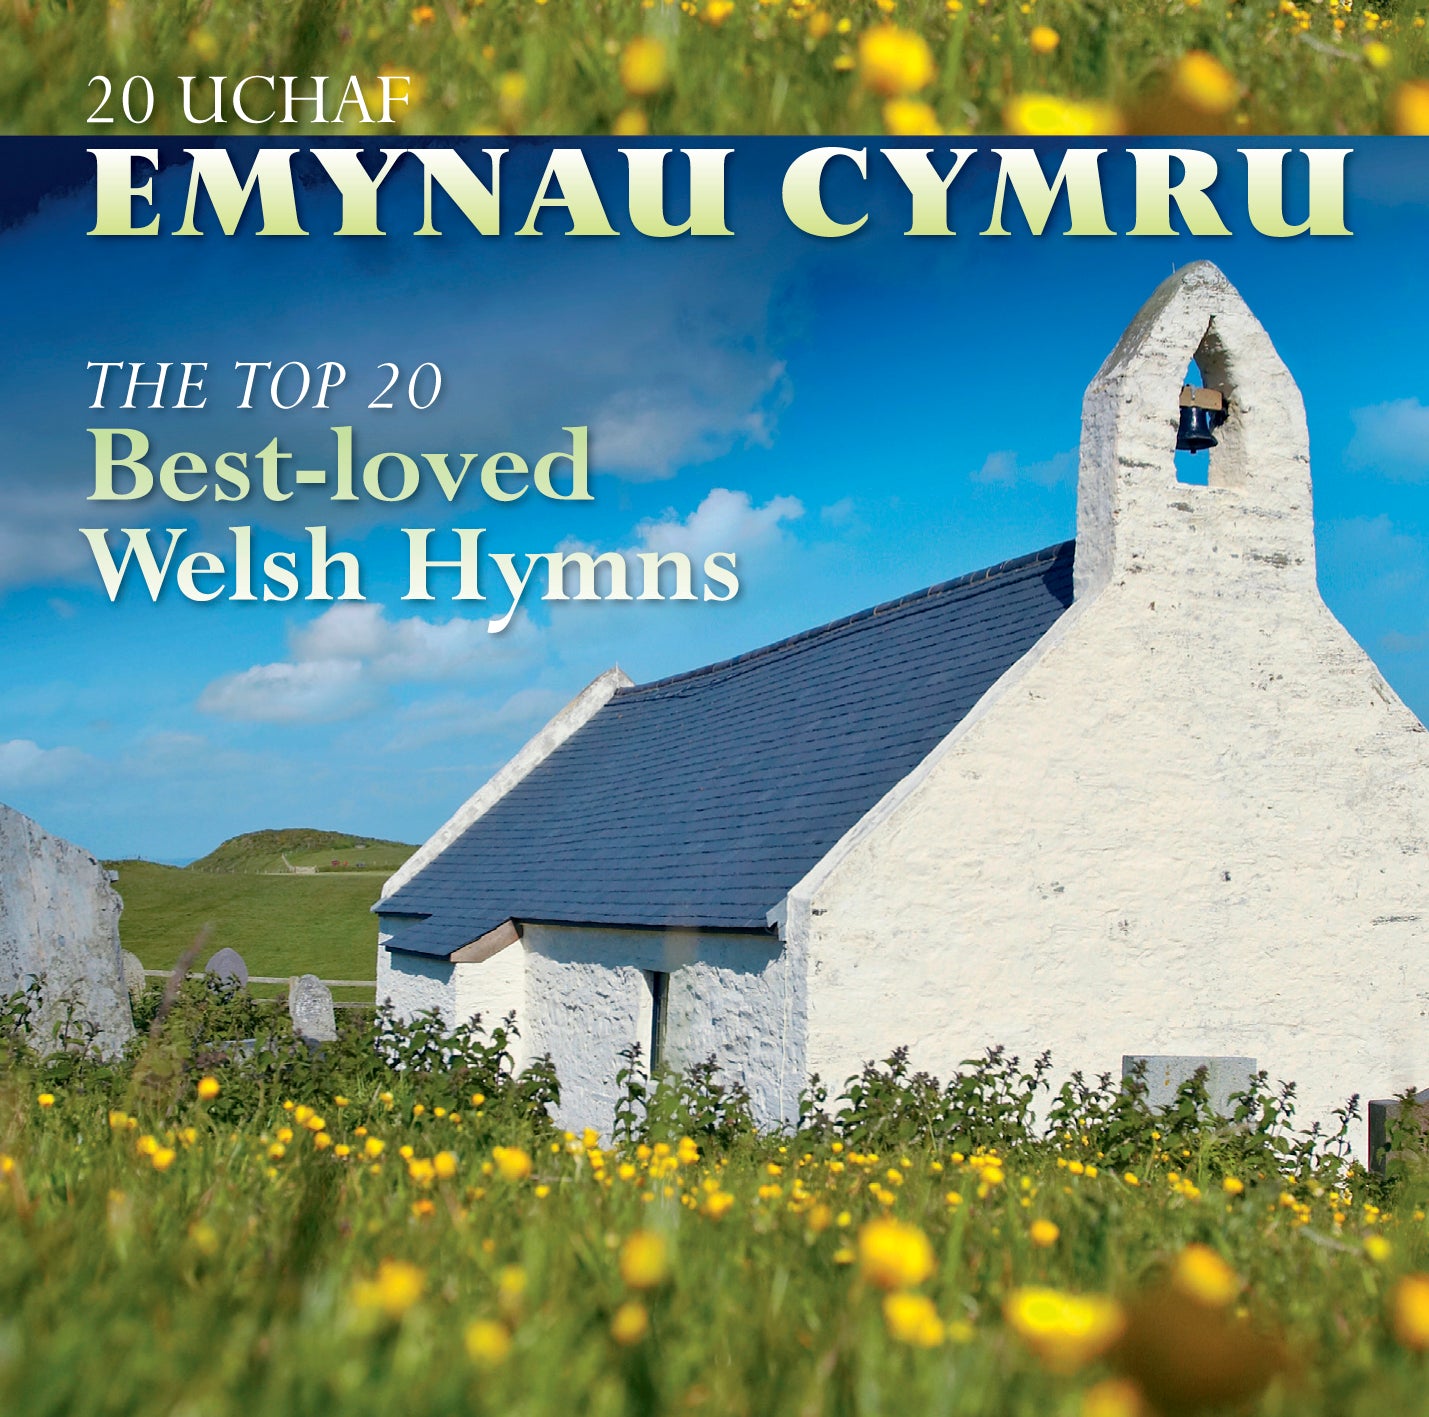 The Top 20 Best-loved Welsh Hymns